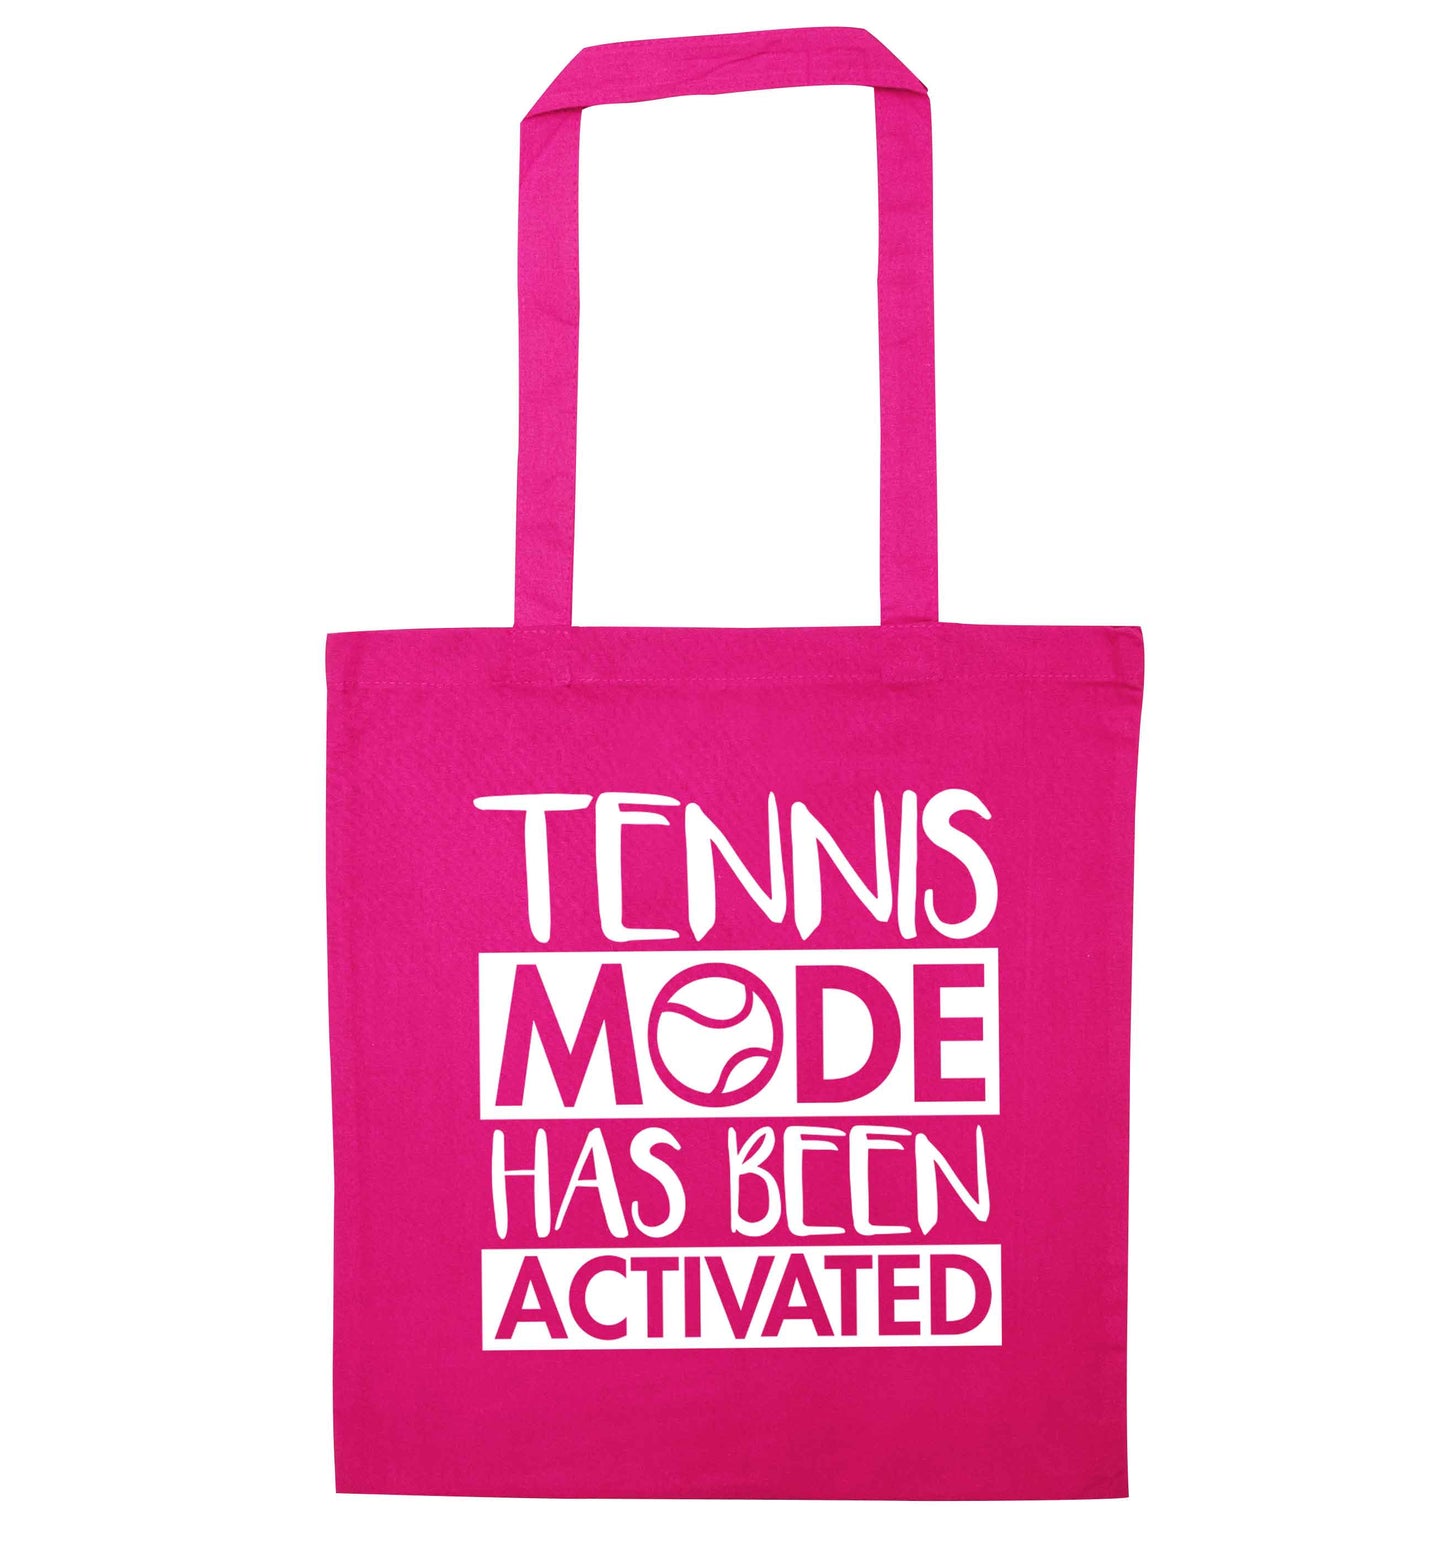 Tennis mode has been activated pink tote bag